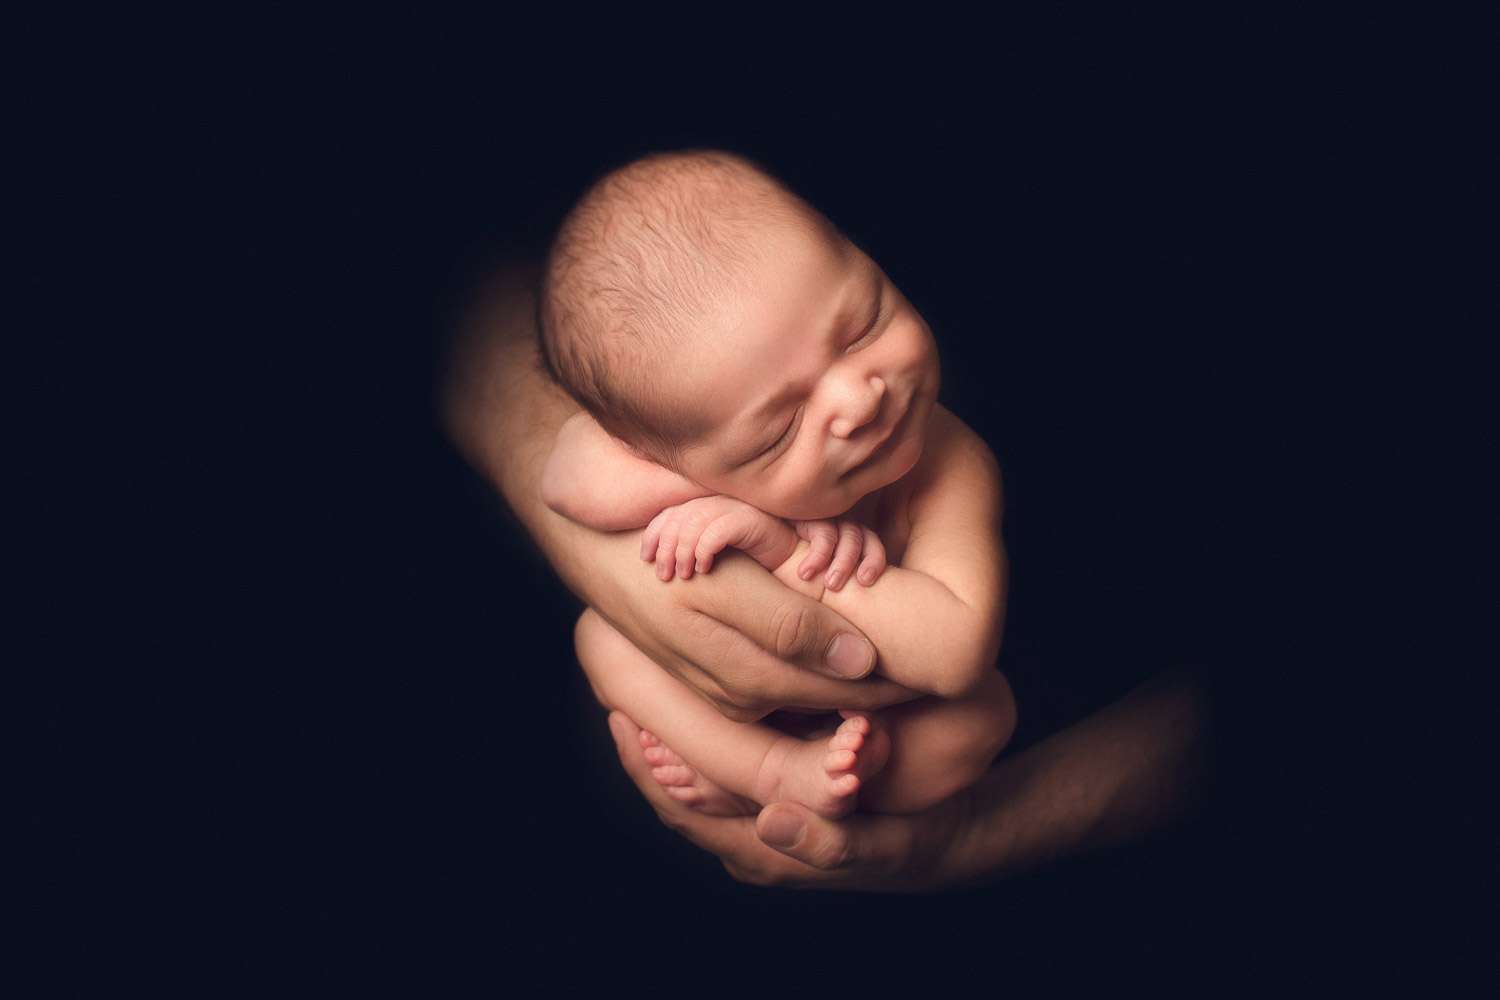 newborn photography with dad's hand - black back ground